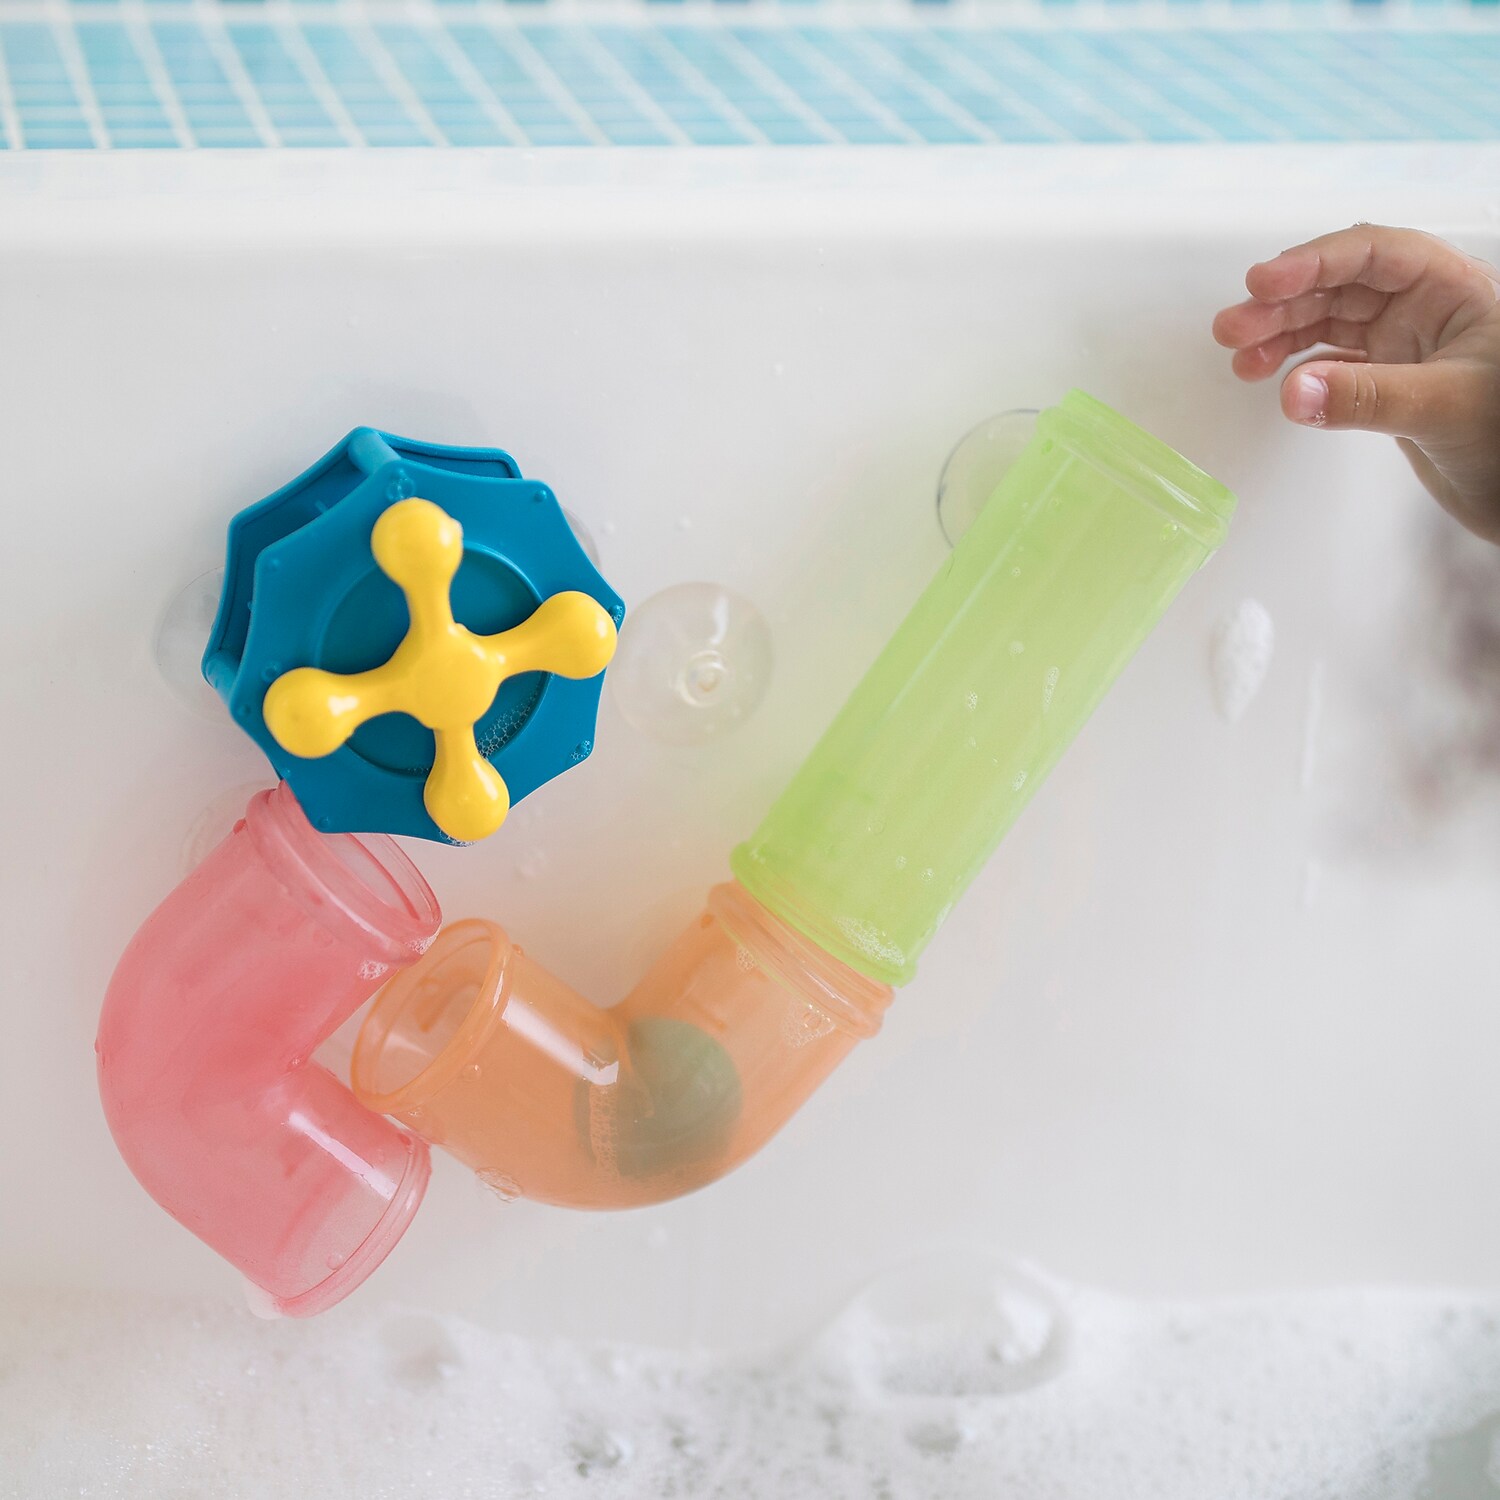 Educational Insights Bright Basics Slide & Splash Spouts: Bath Toy For Toddlers - image 4 of 6